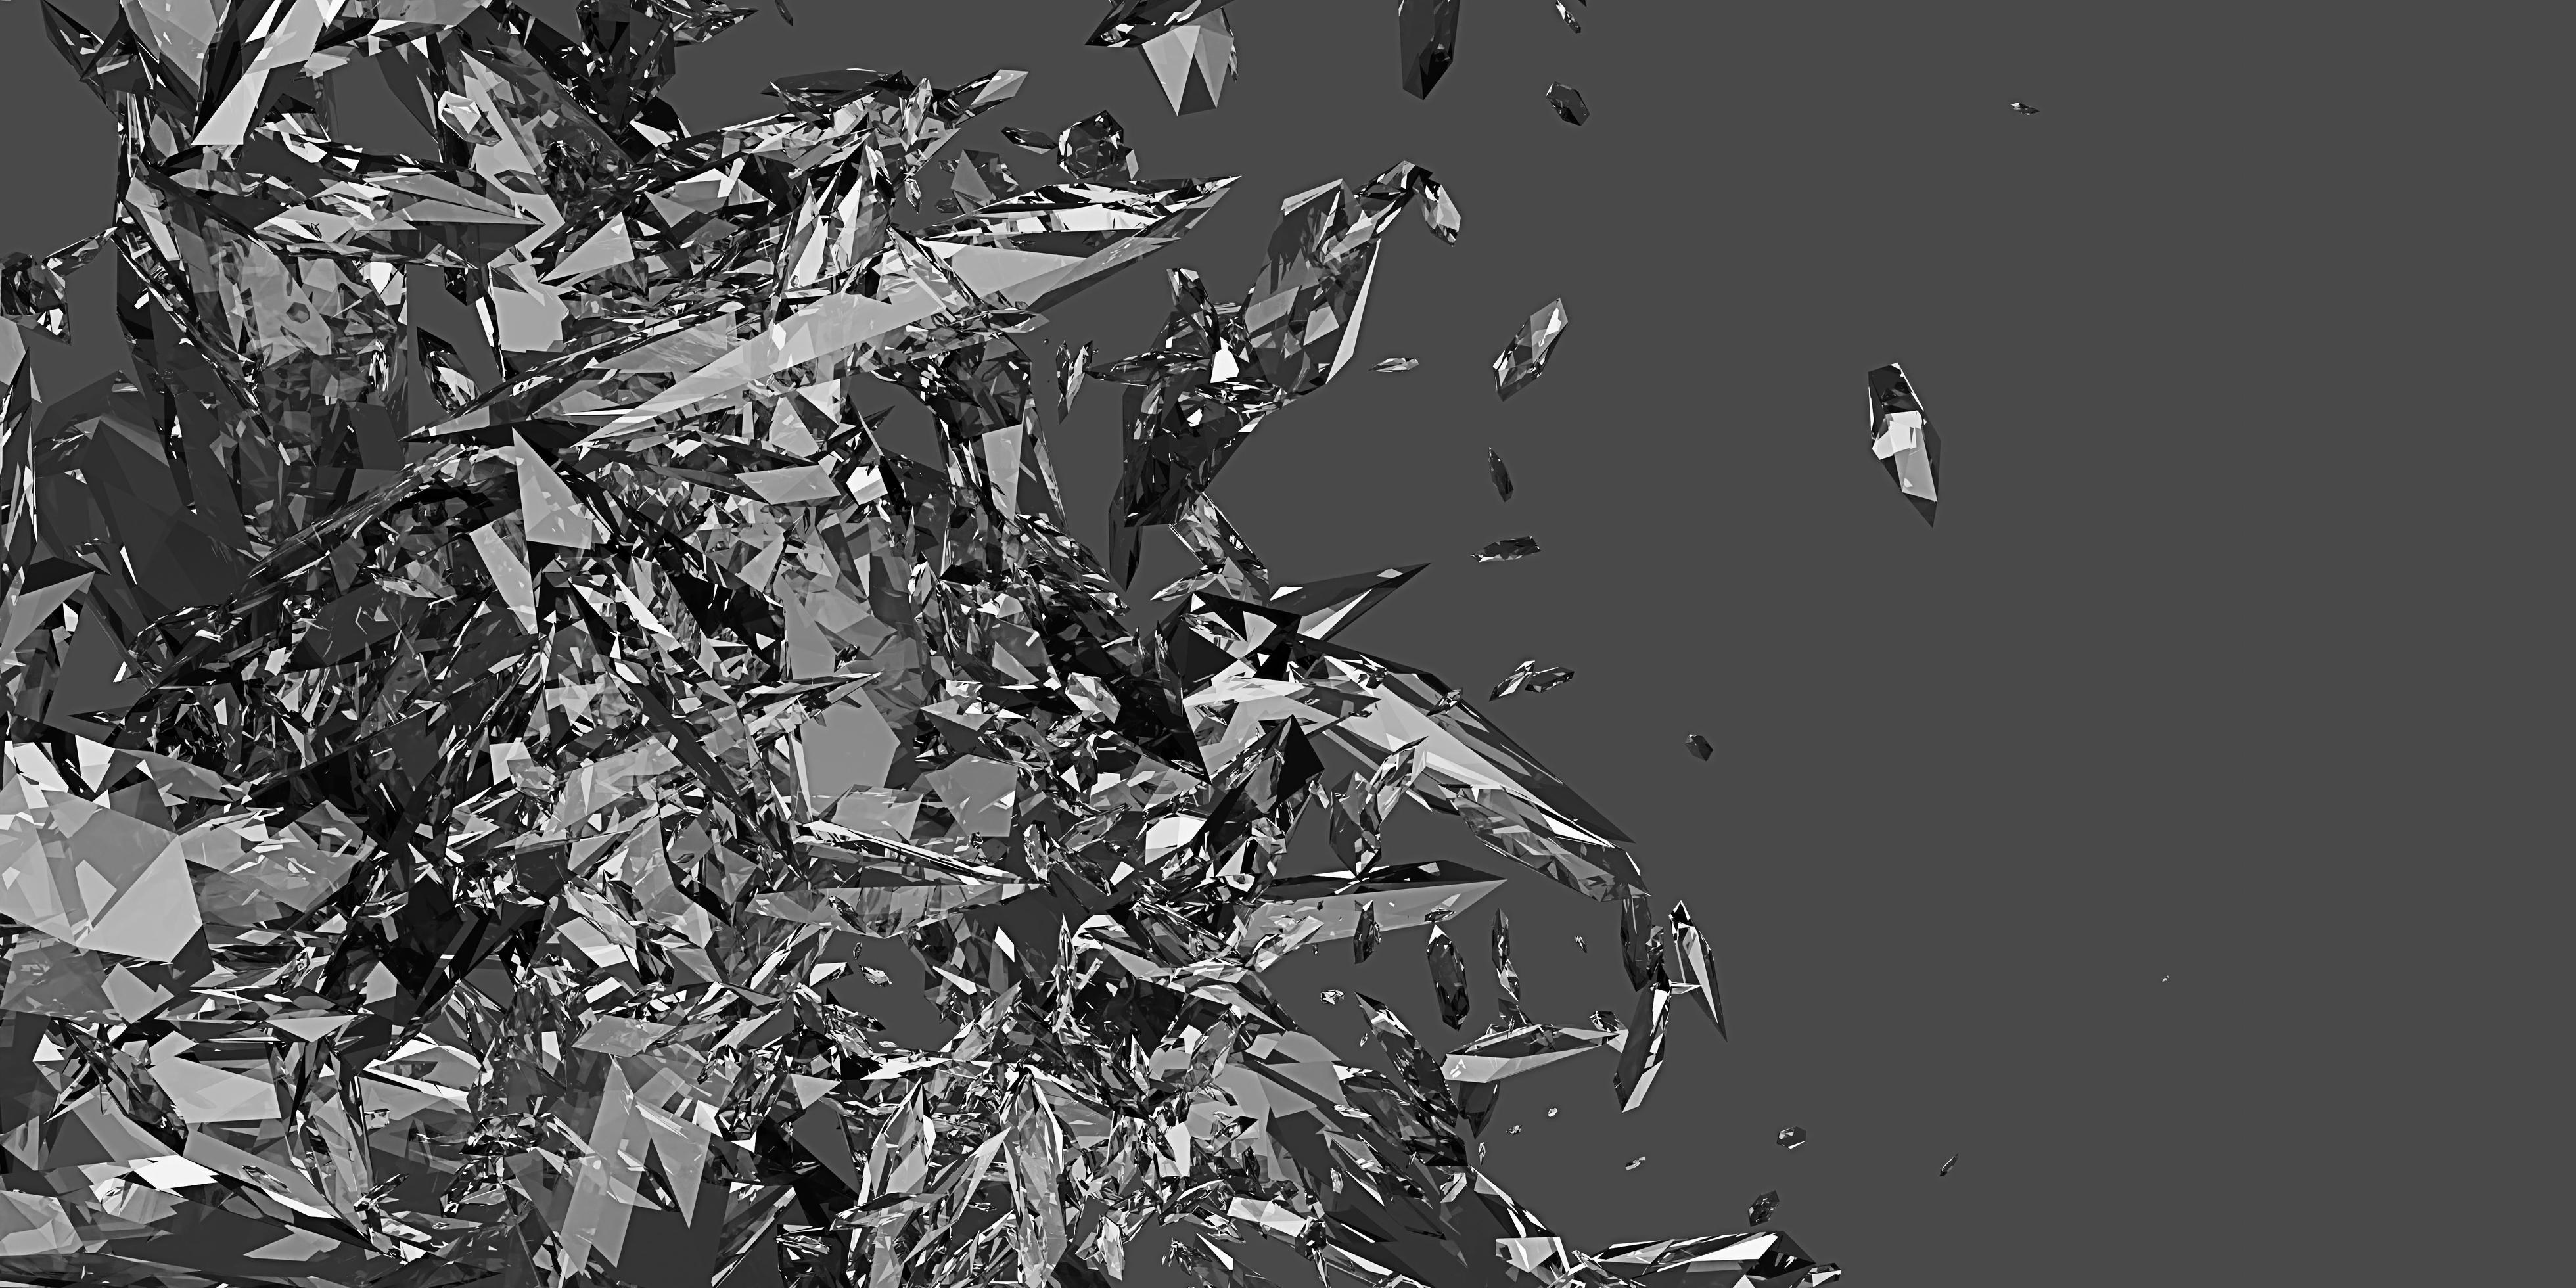 https://static.vecteezy.com/system/resources/previews/014/684/592/large_2x/broken-glass-shattered-glass-dust-particles-explosion-fragments-scattered-background-3d-illustration-free-photo.jpg